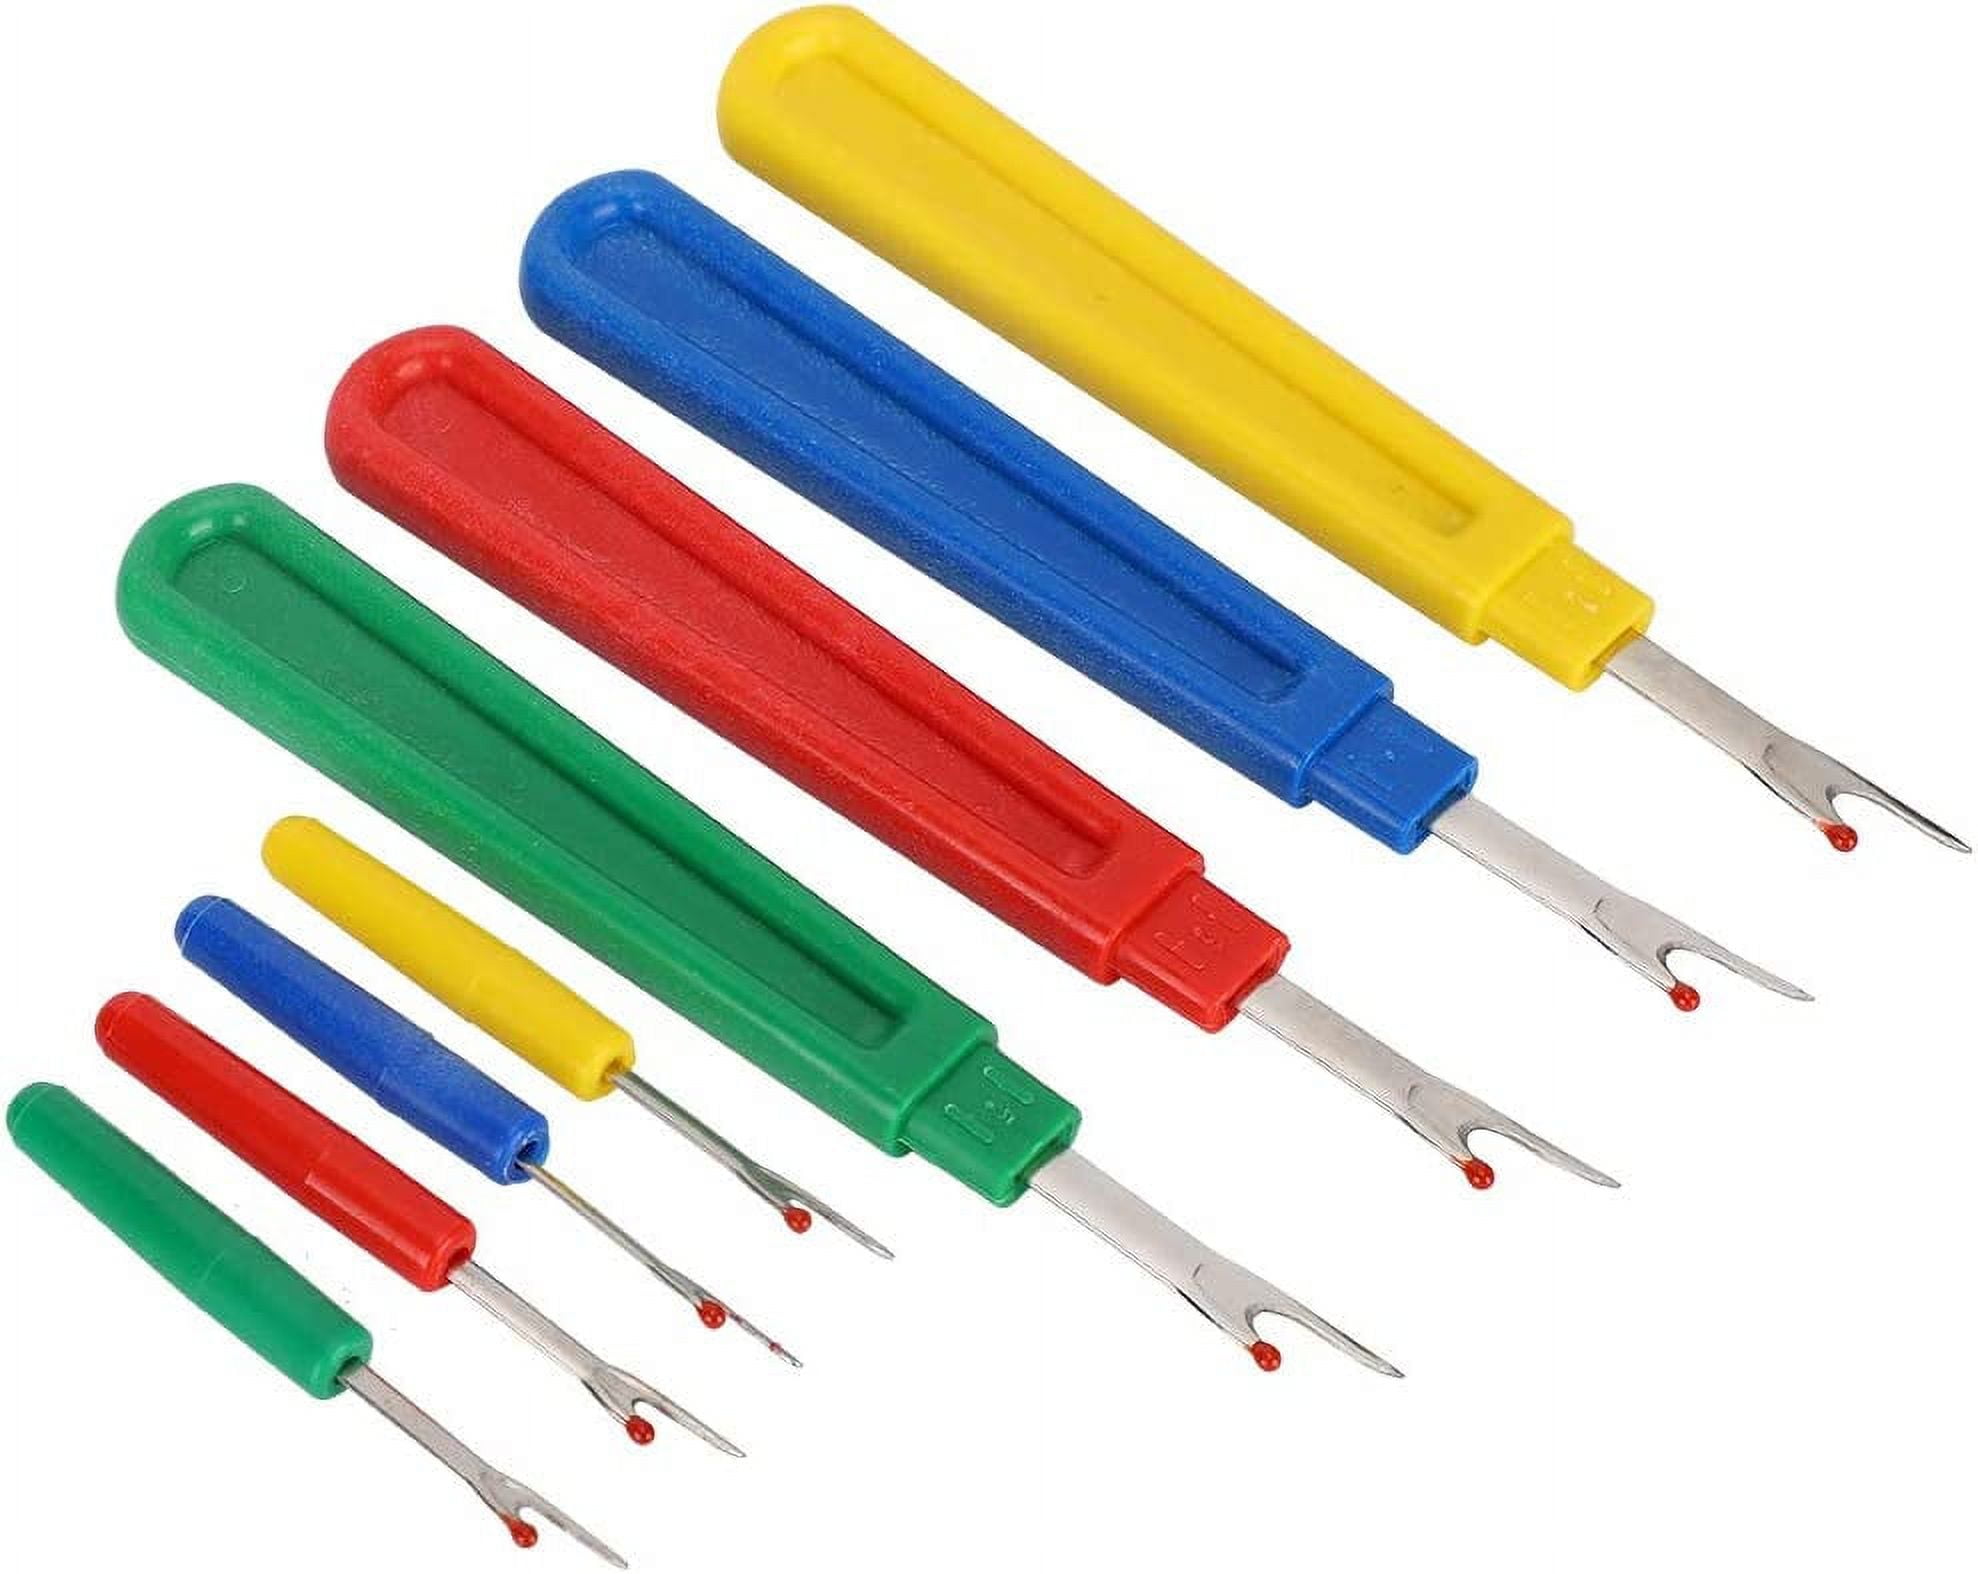 Sewing Seam Ripper Tool 7PCS, 2 Big and 3 Small Handy Stitch Ripper Sewing  Tools with 2 Scissors for Sewing Crafting Thread Removin 